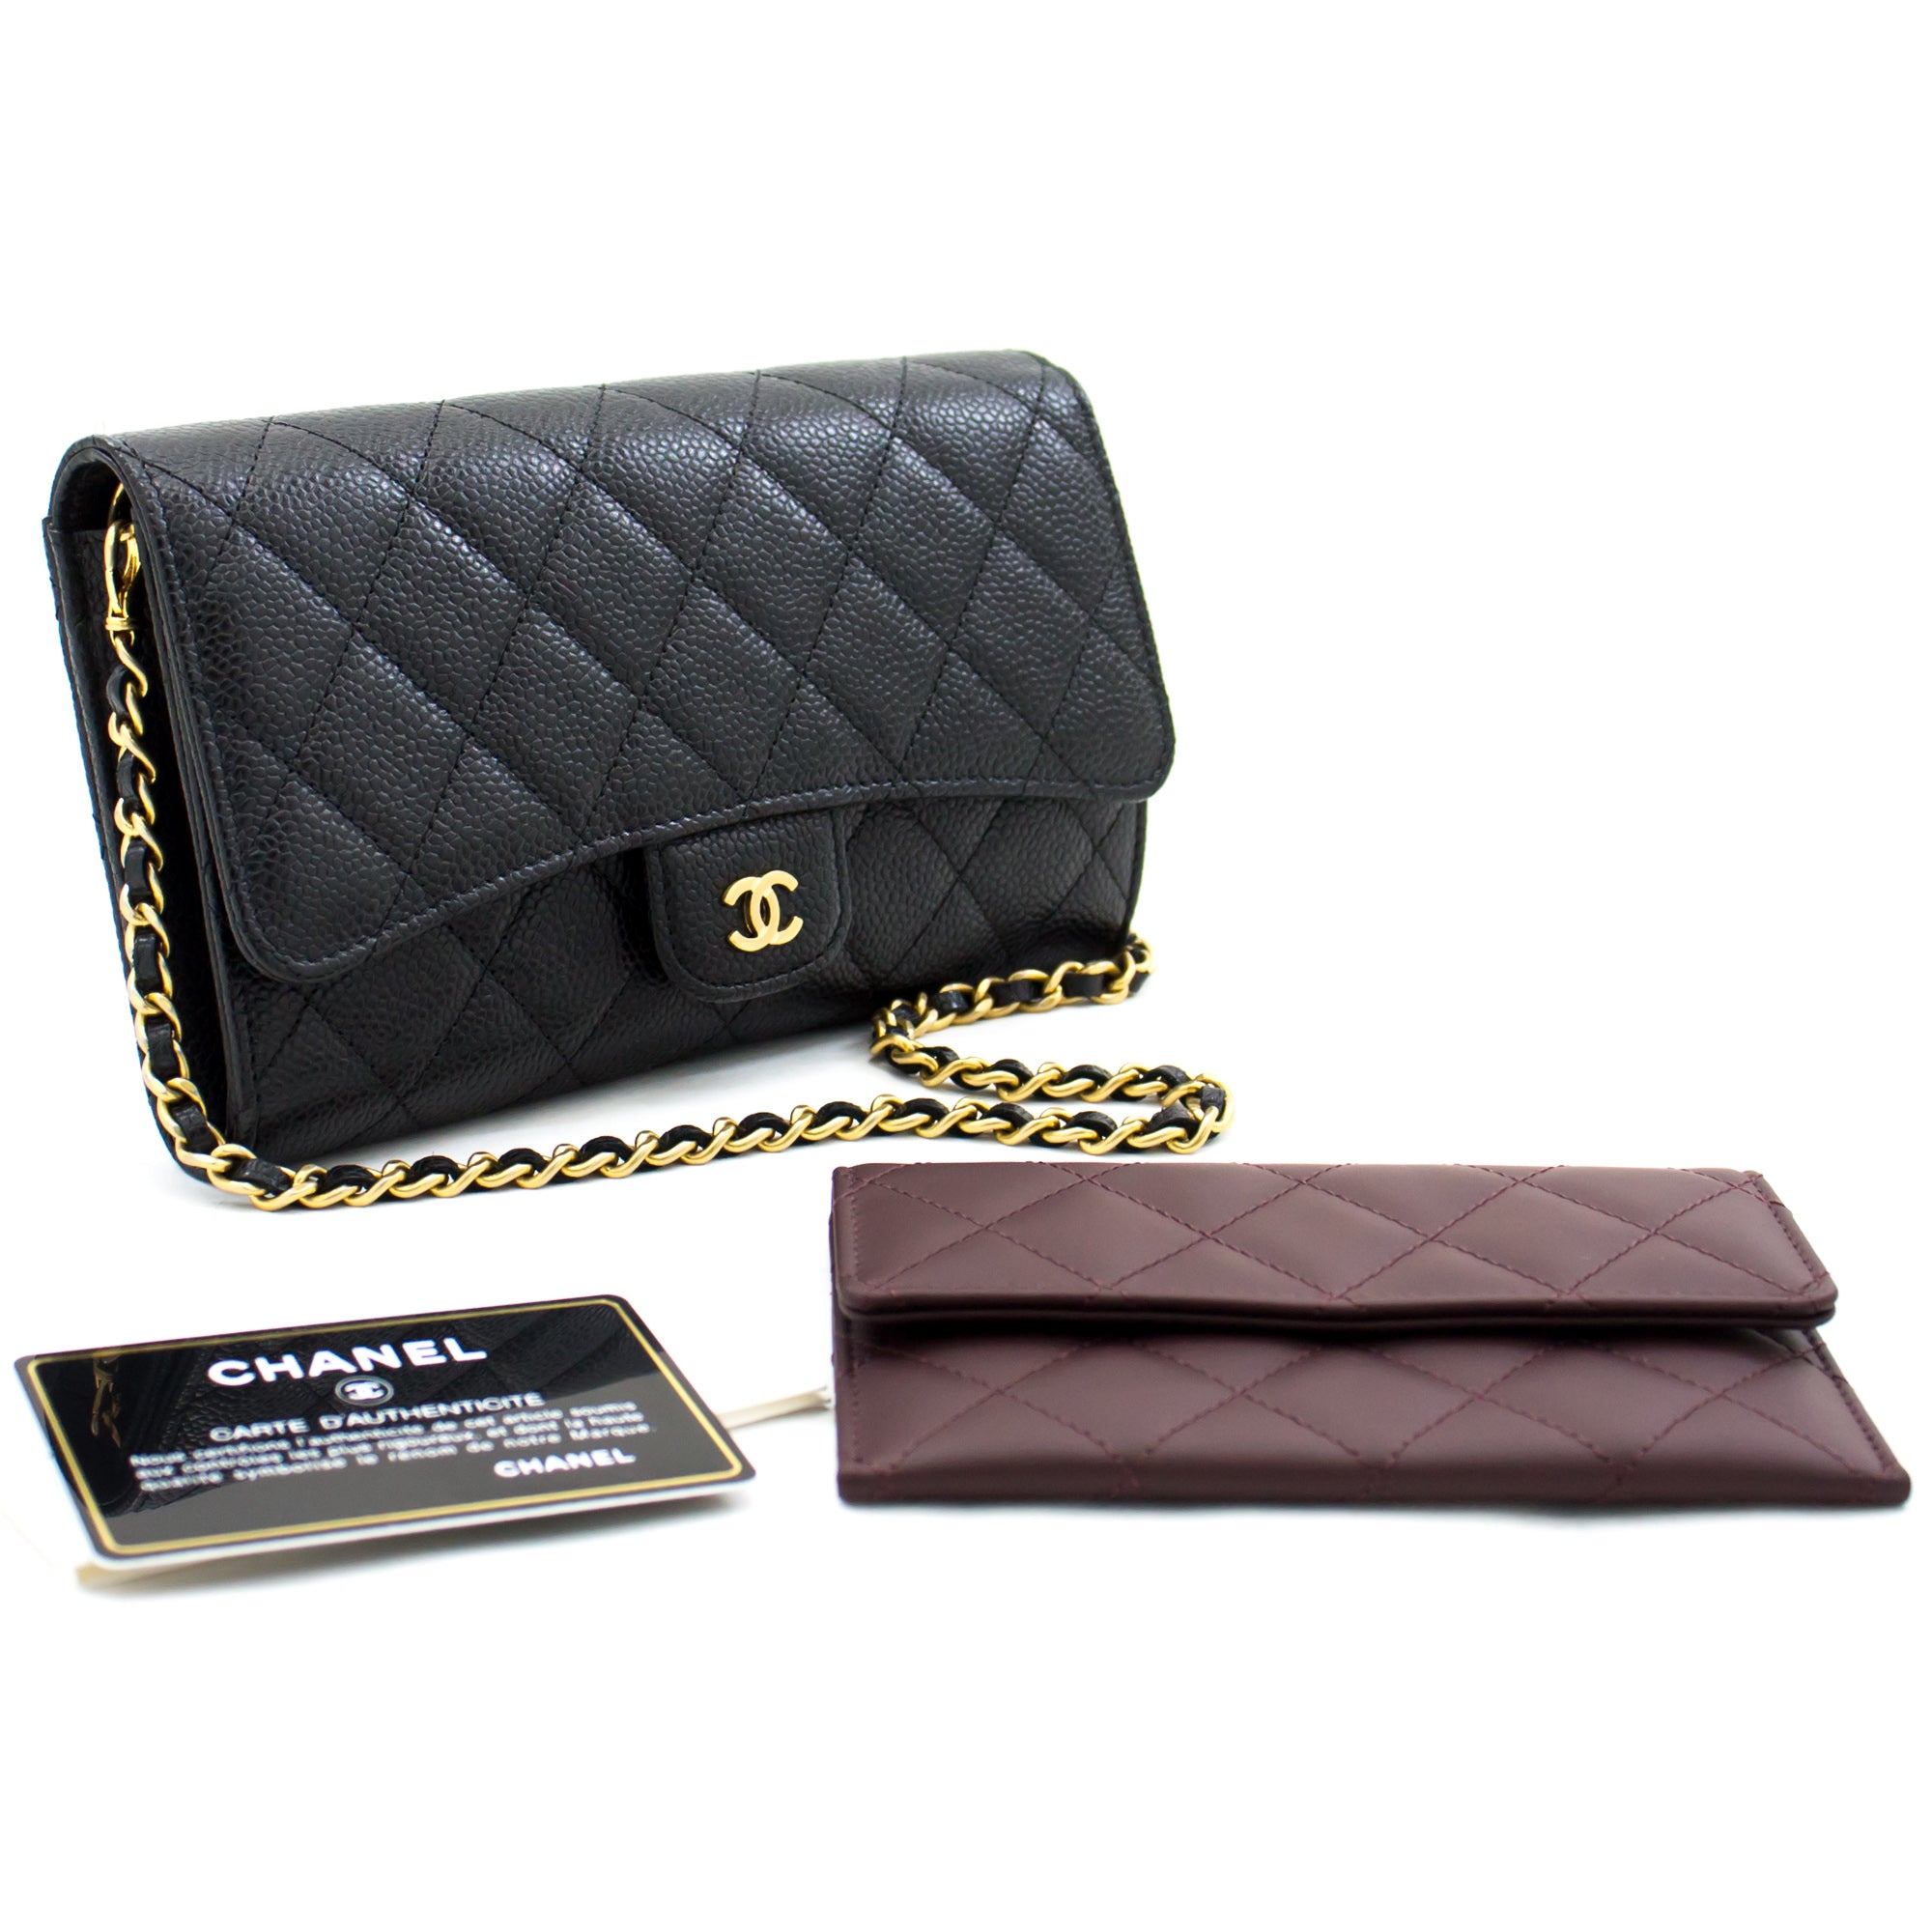 CHANEL, Bags, Chanel Black Lambskin Leather Vanity Bag With Chain